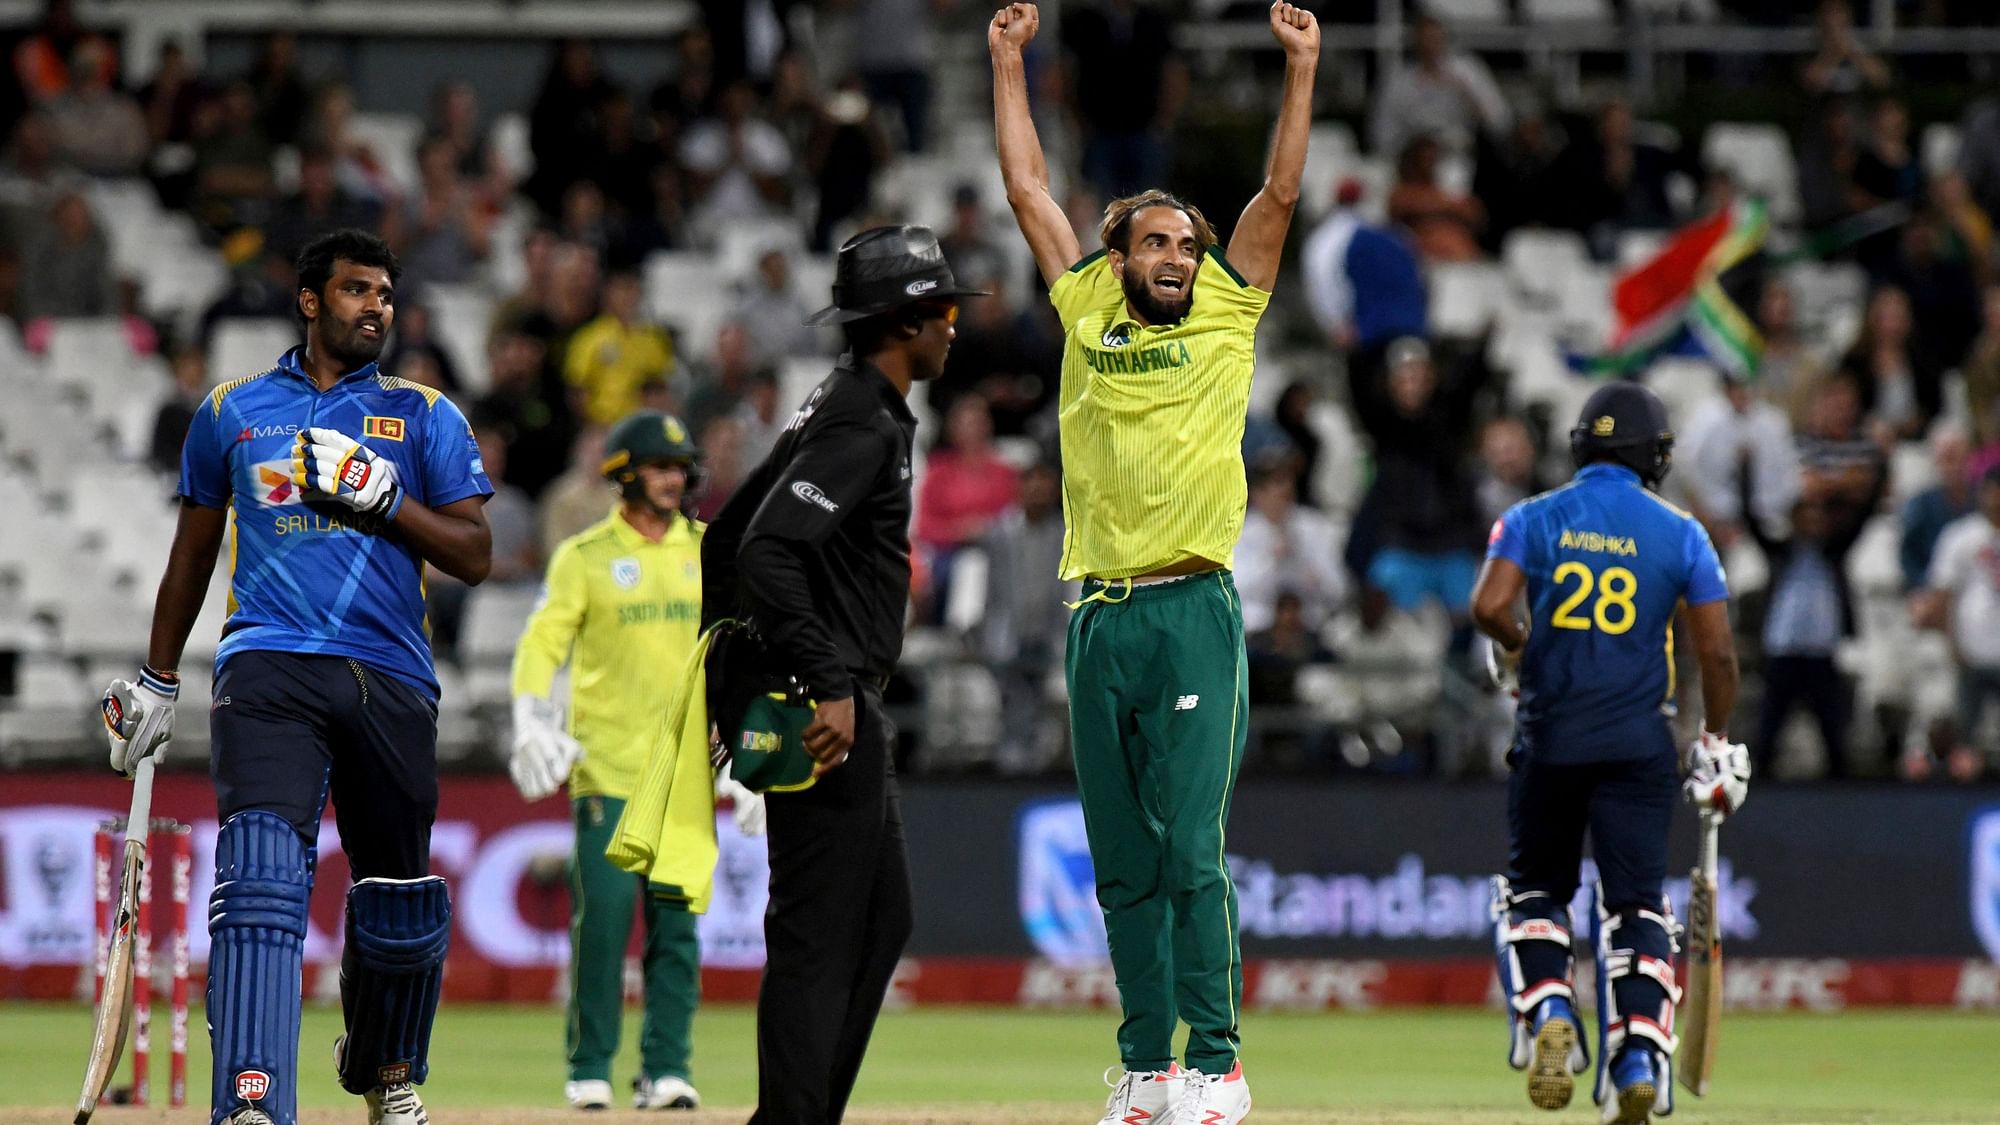 Imran Tahir celebrates after South Africa completed a Super Over win in their first T20I against Sri Lanka at Cape Town.